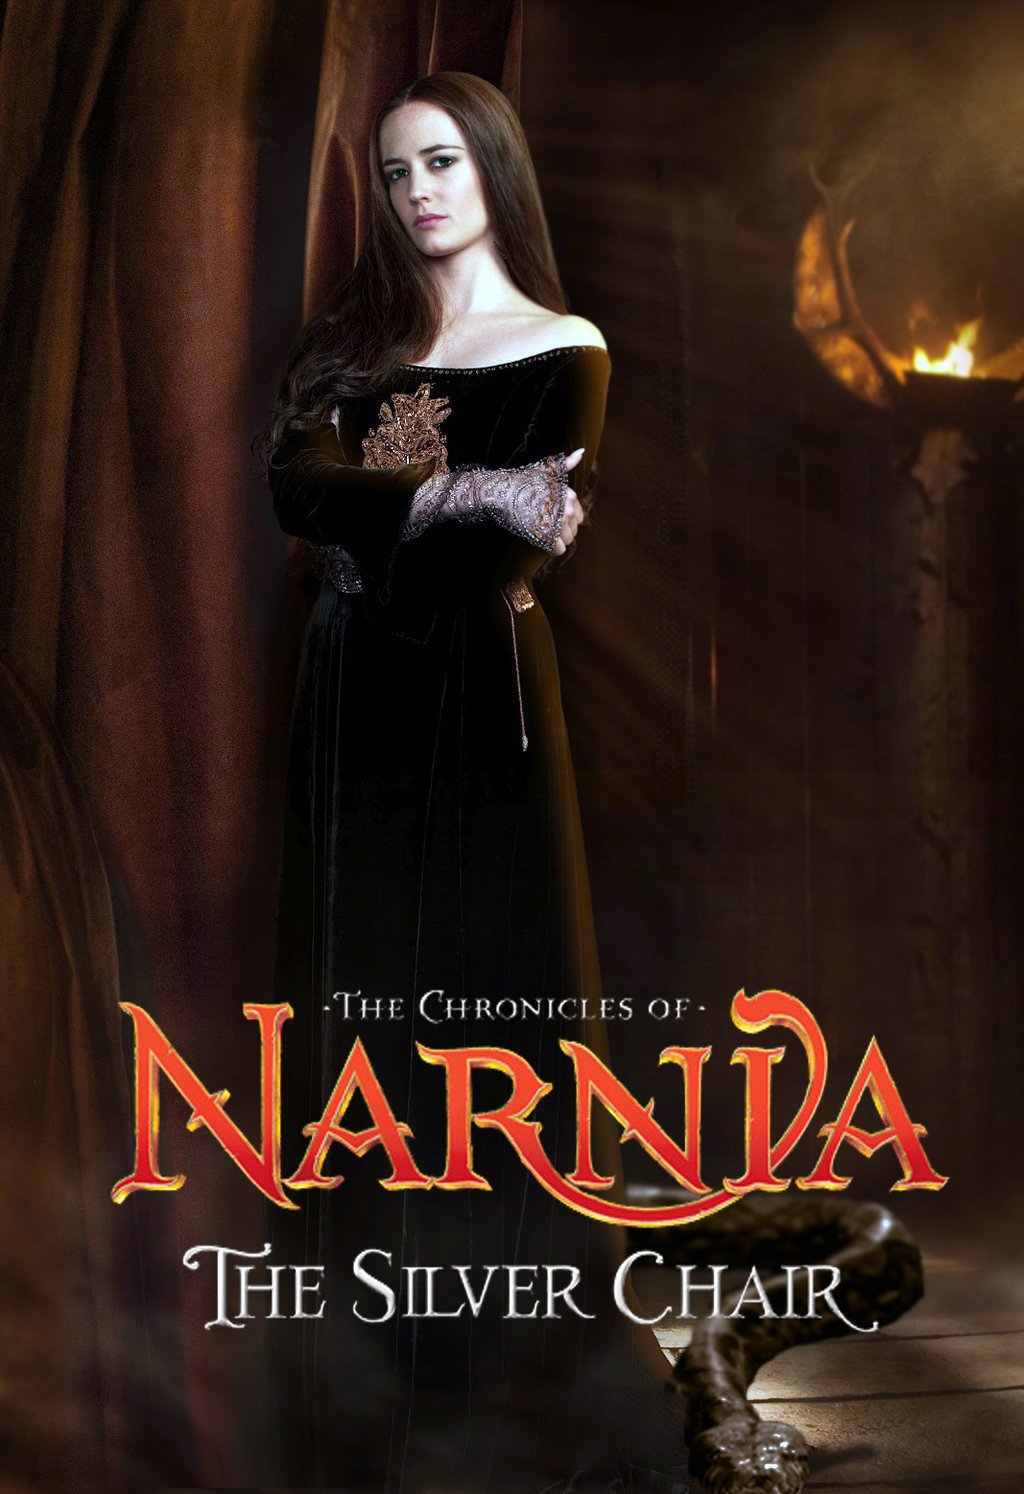 The Chronicles of Narnia: The Silver Chair Poster by 